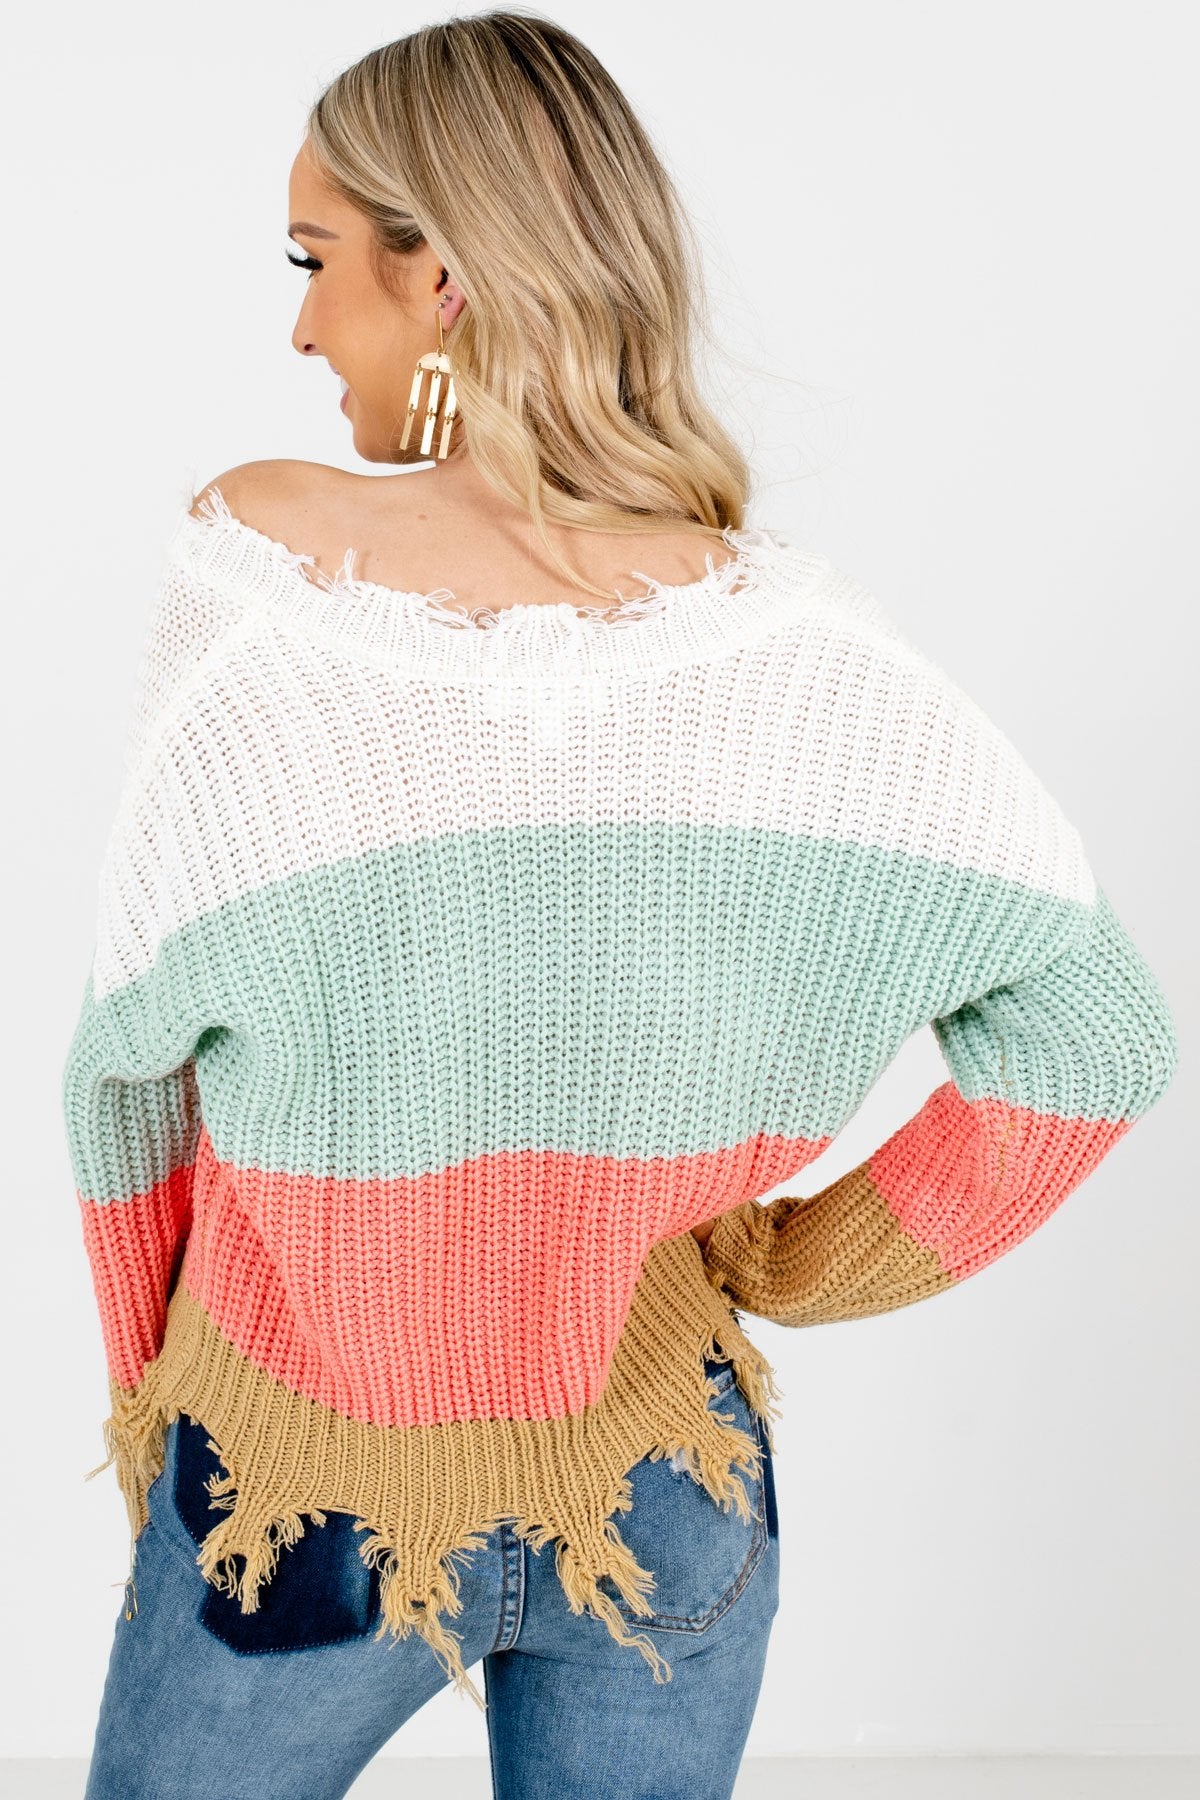 Mint Green Long Sleeve Boutique Sweaters for Women